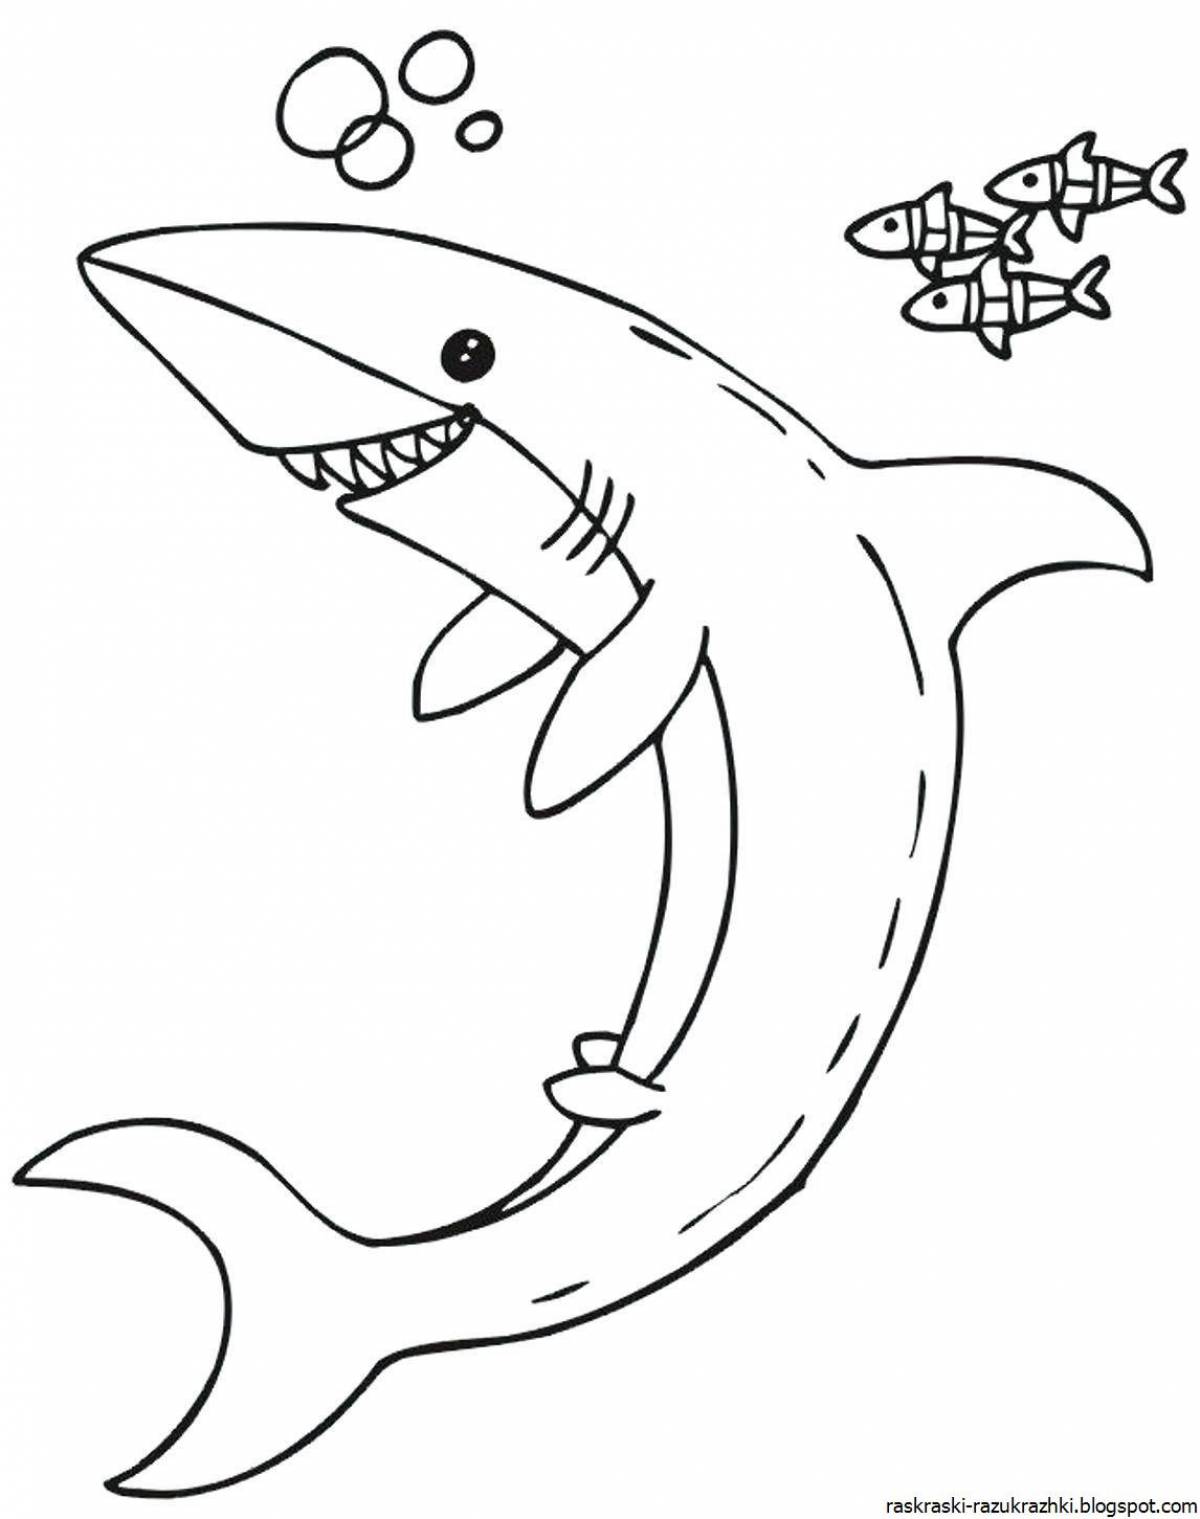 Awesome shark coloring pages for kids